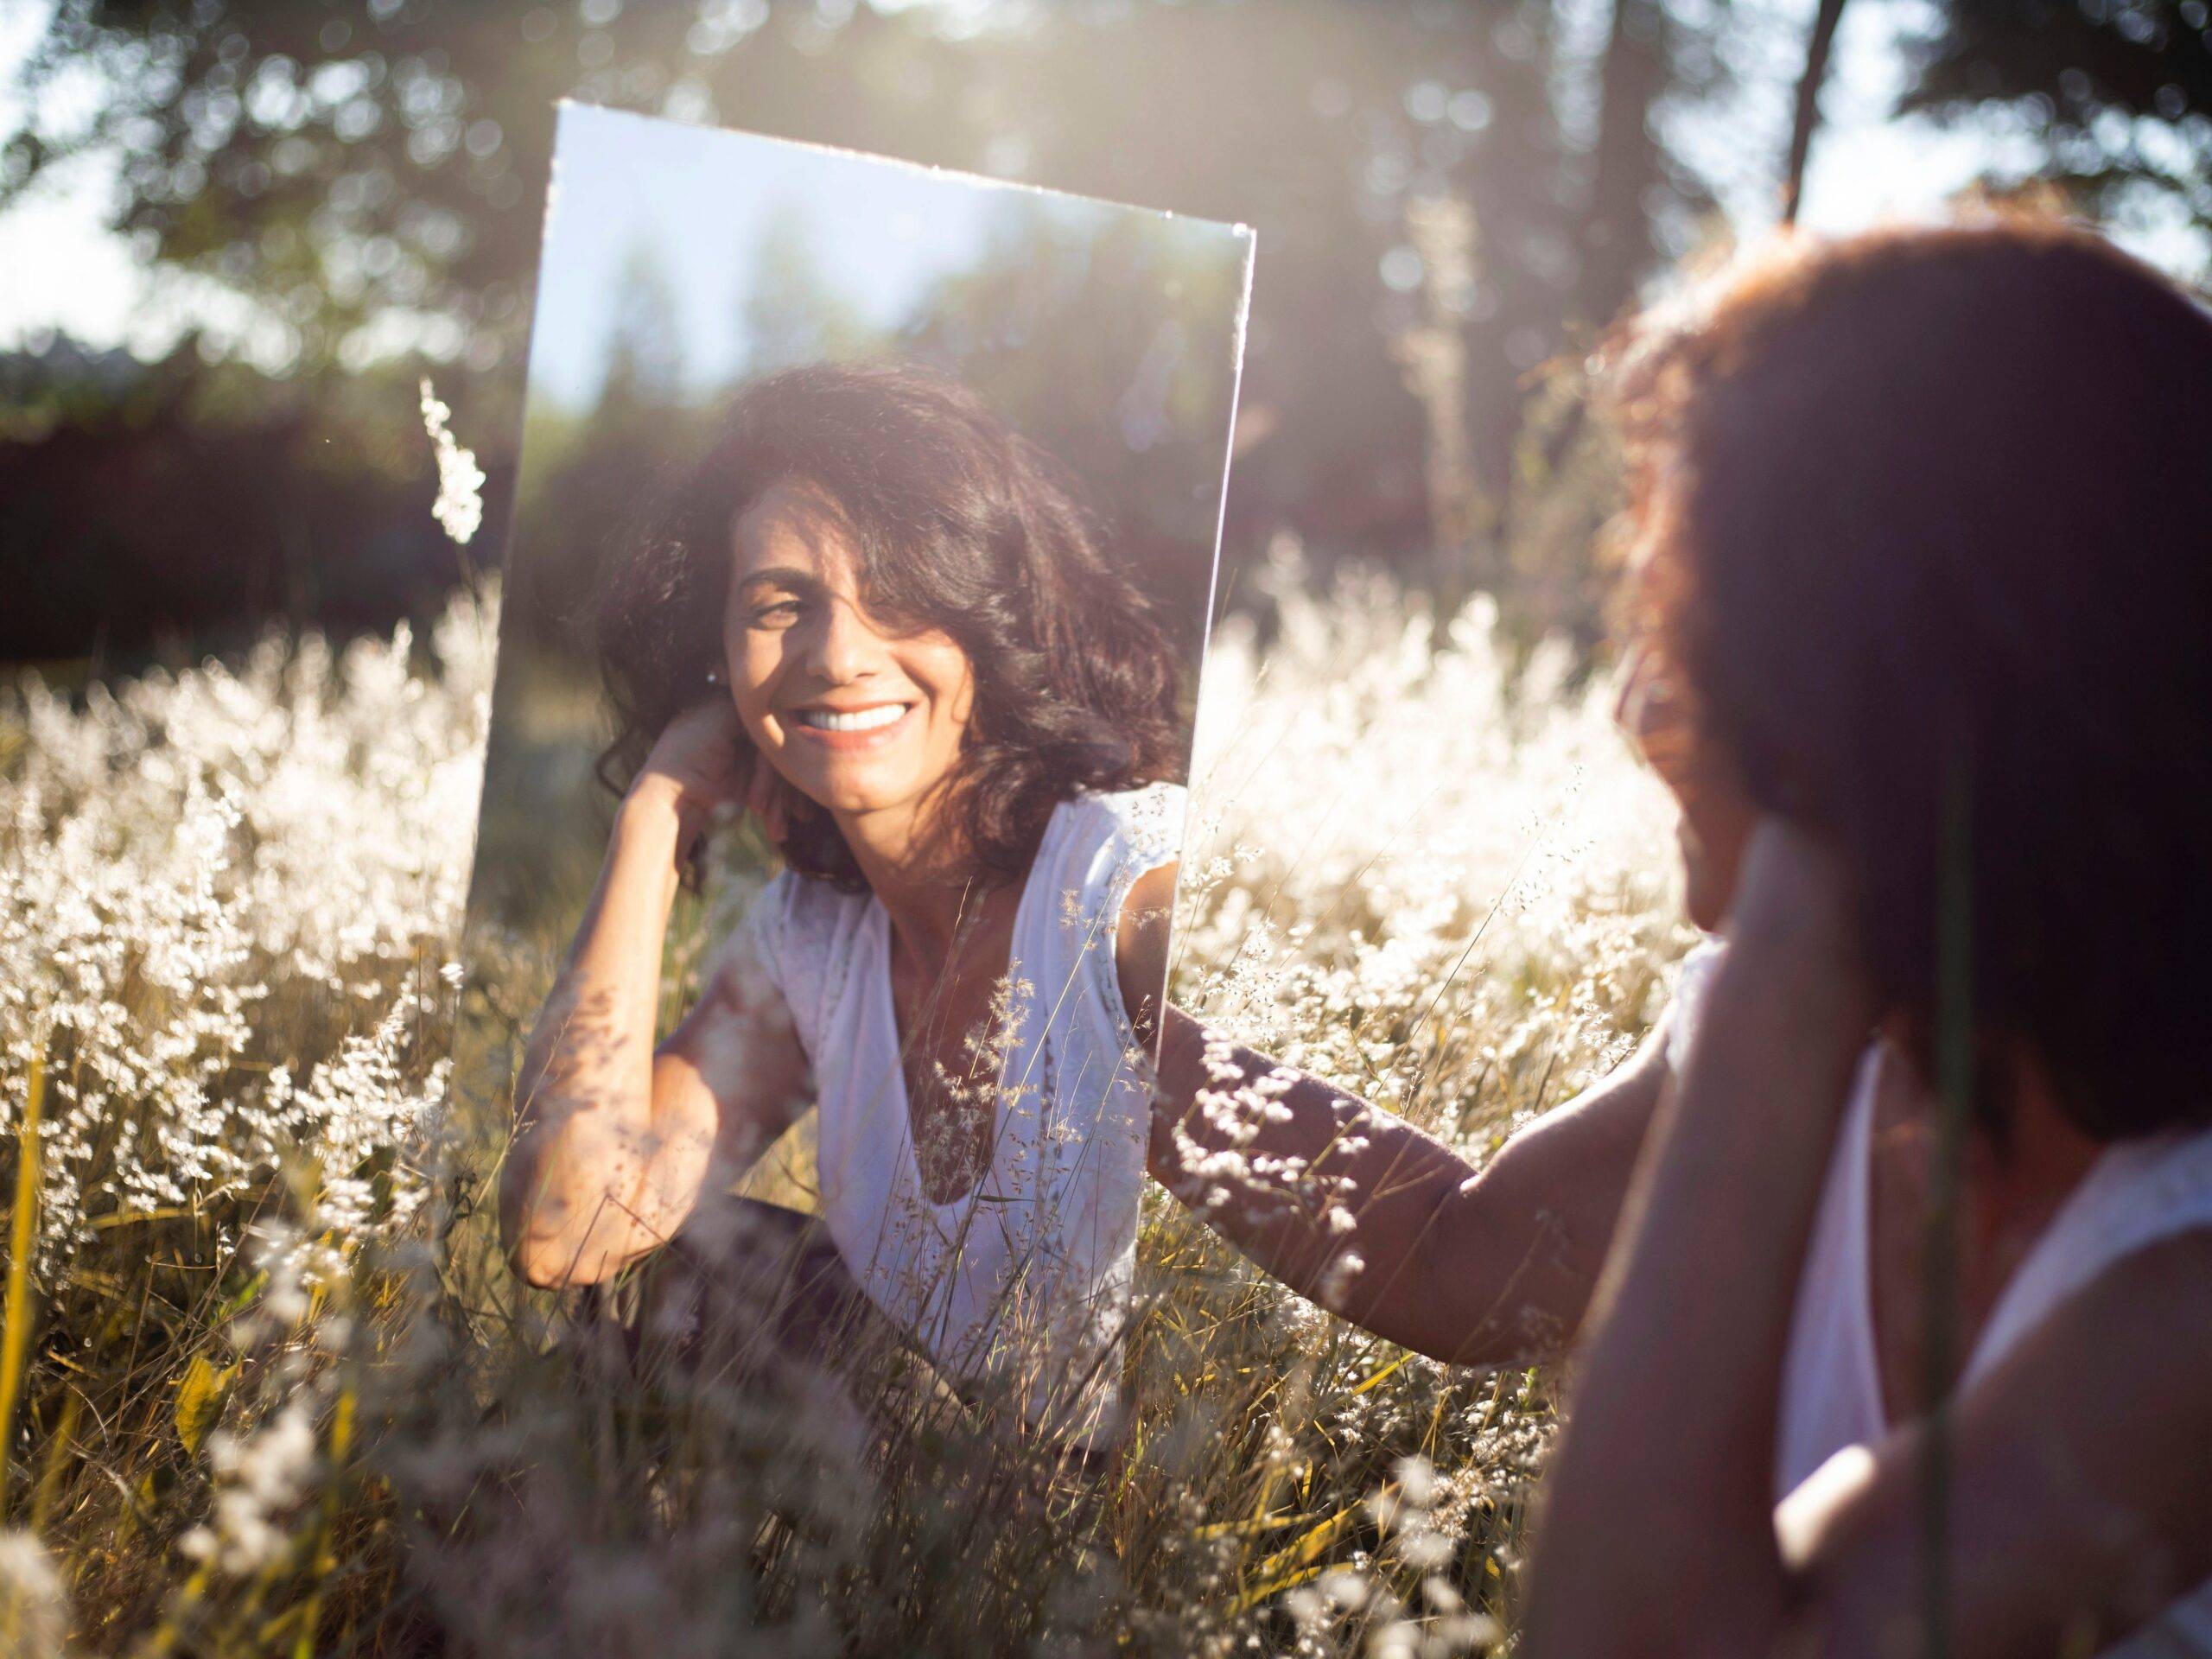 Woman looking at her reflection in a mirror in the middle of an open field